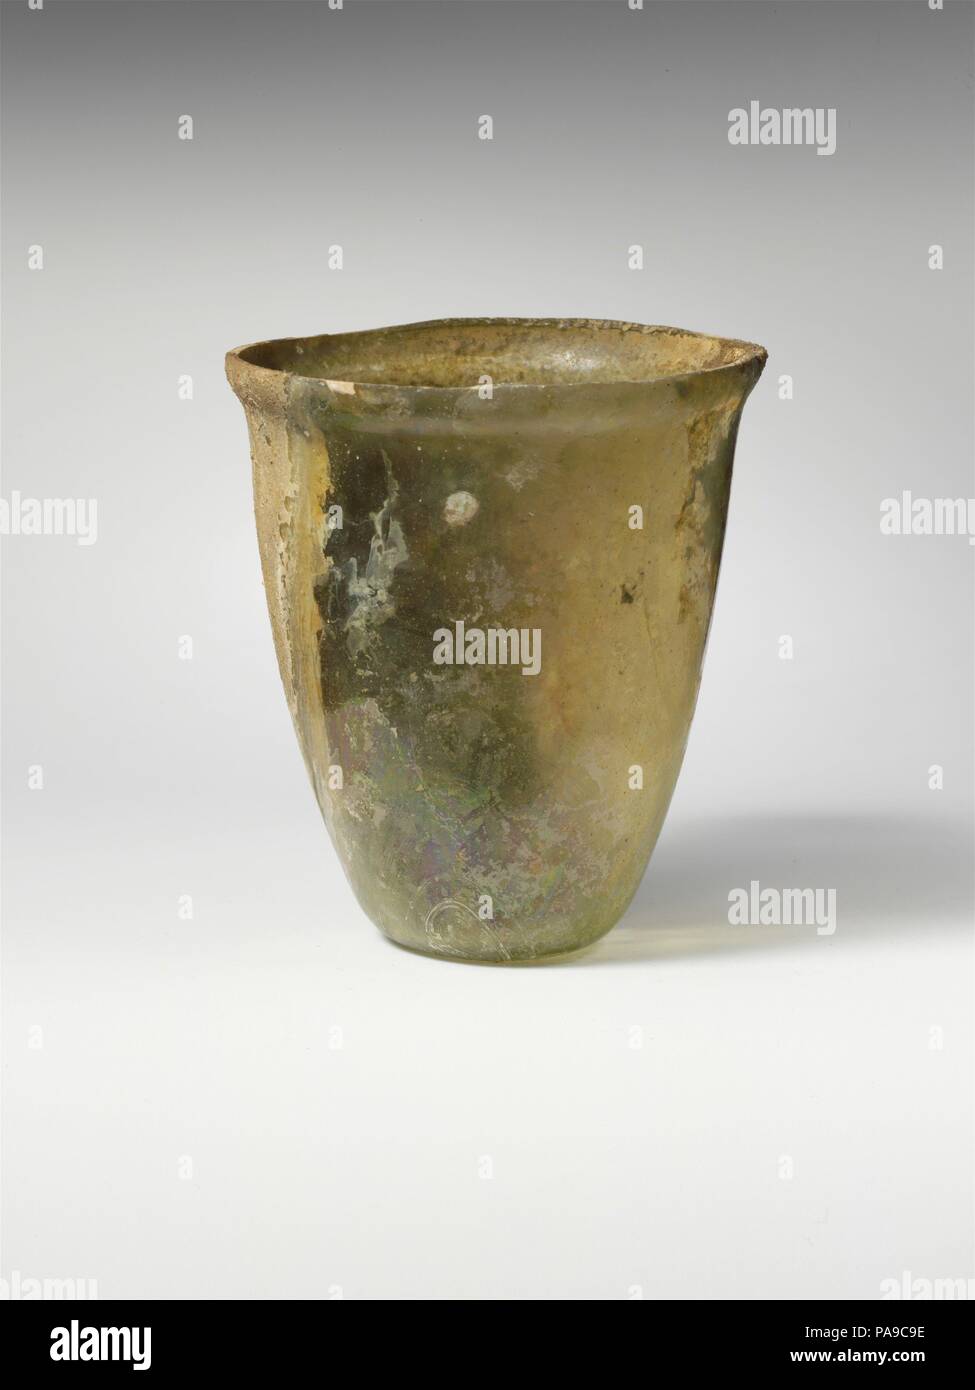 Glass beaker. Culture: Roman. Dimensions: H.: 3 5/8 in. (9.2 cm). Date: 1st century  A.D..  Colorless with pale greenish tinge.  Knocked-off, uneven rim; slightly bulging collar below rim; convex side tapering downward; small, concave bottom.  Intact; pinprick  bubbles and blowing striations; brilliant iridescence and faint weathering on one side, but two-thirds of body covered with muddy brown encrustation. Museum: Metropolitan Museum of Art, New York, USA. Stock Photo